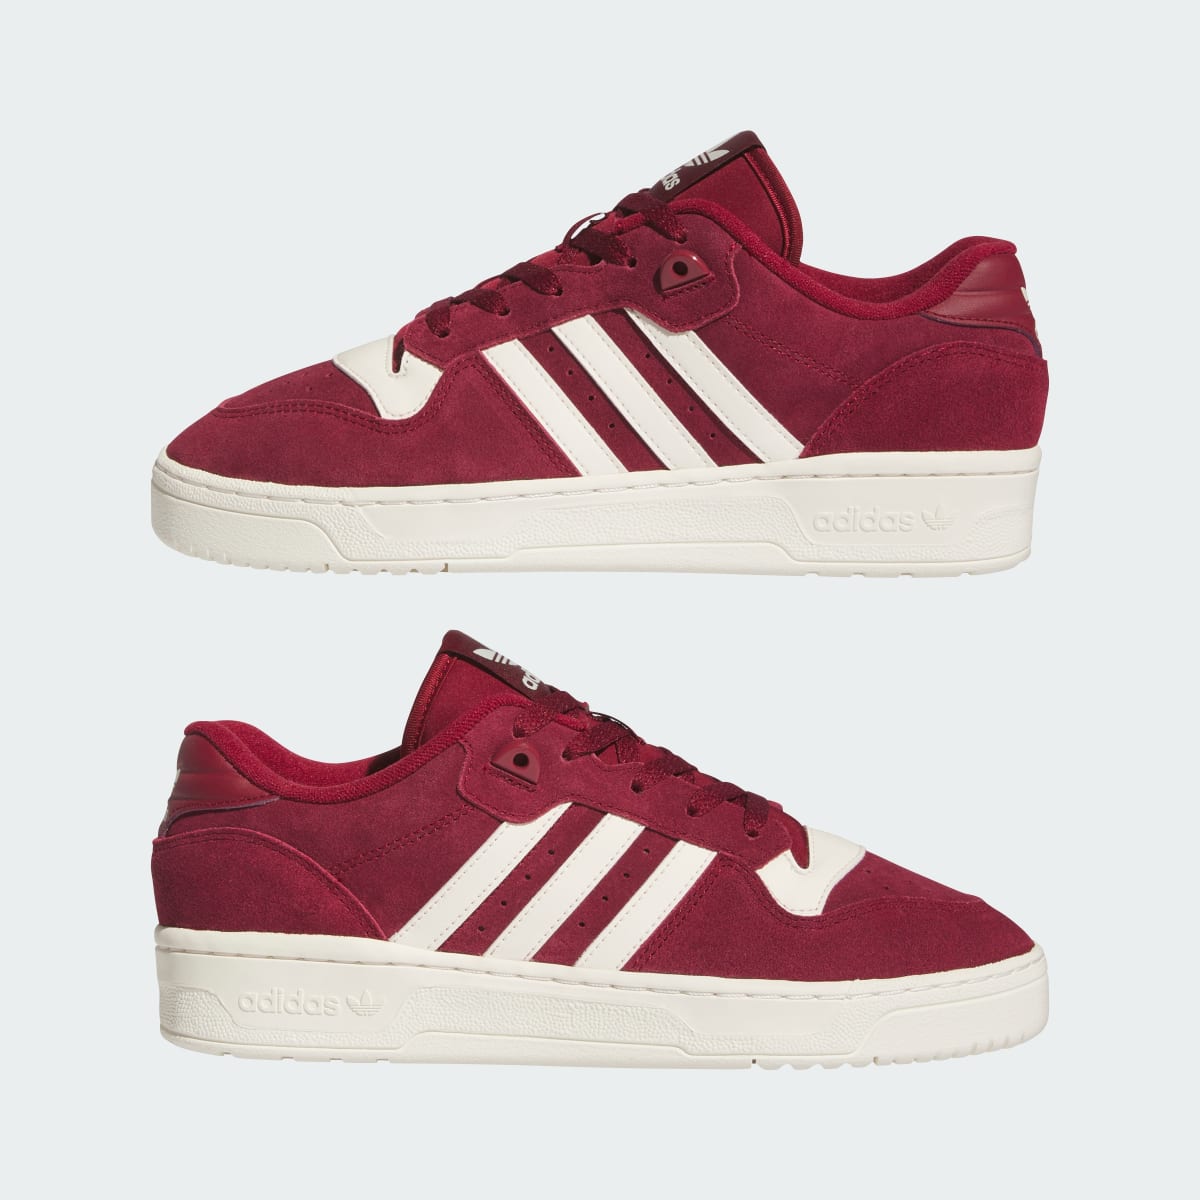 Adidas Rivalry Low Schuh. 8